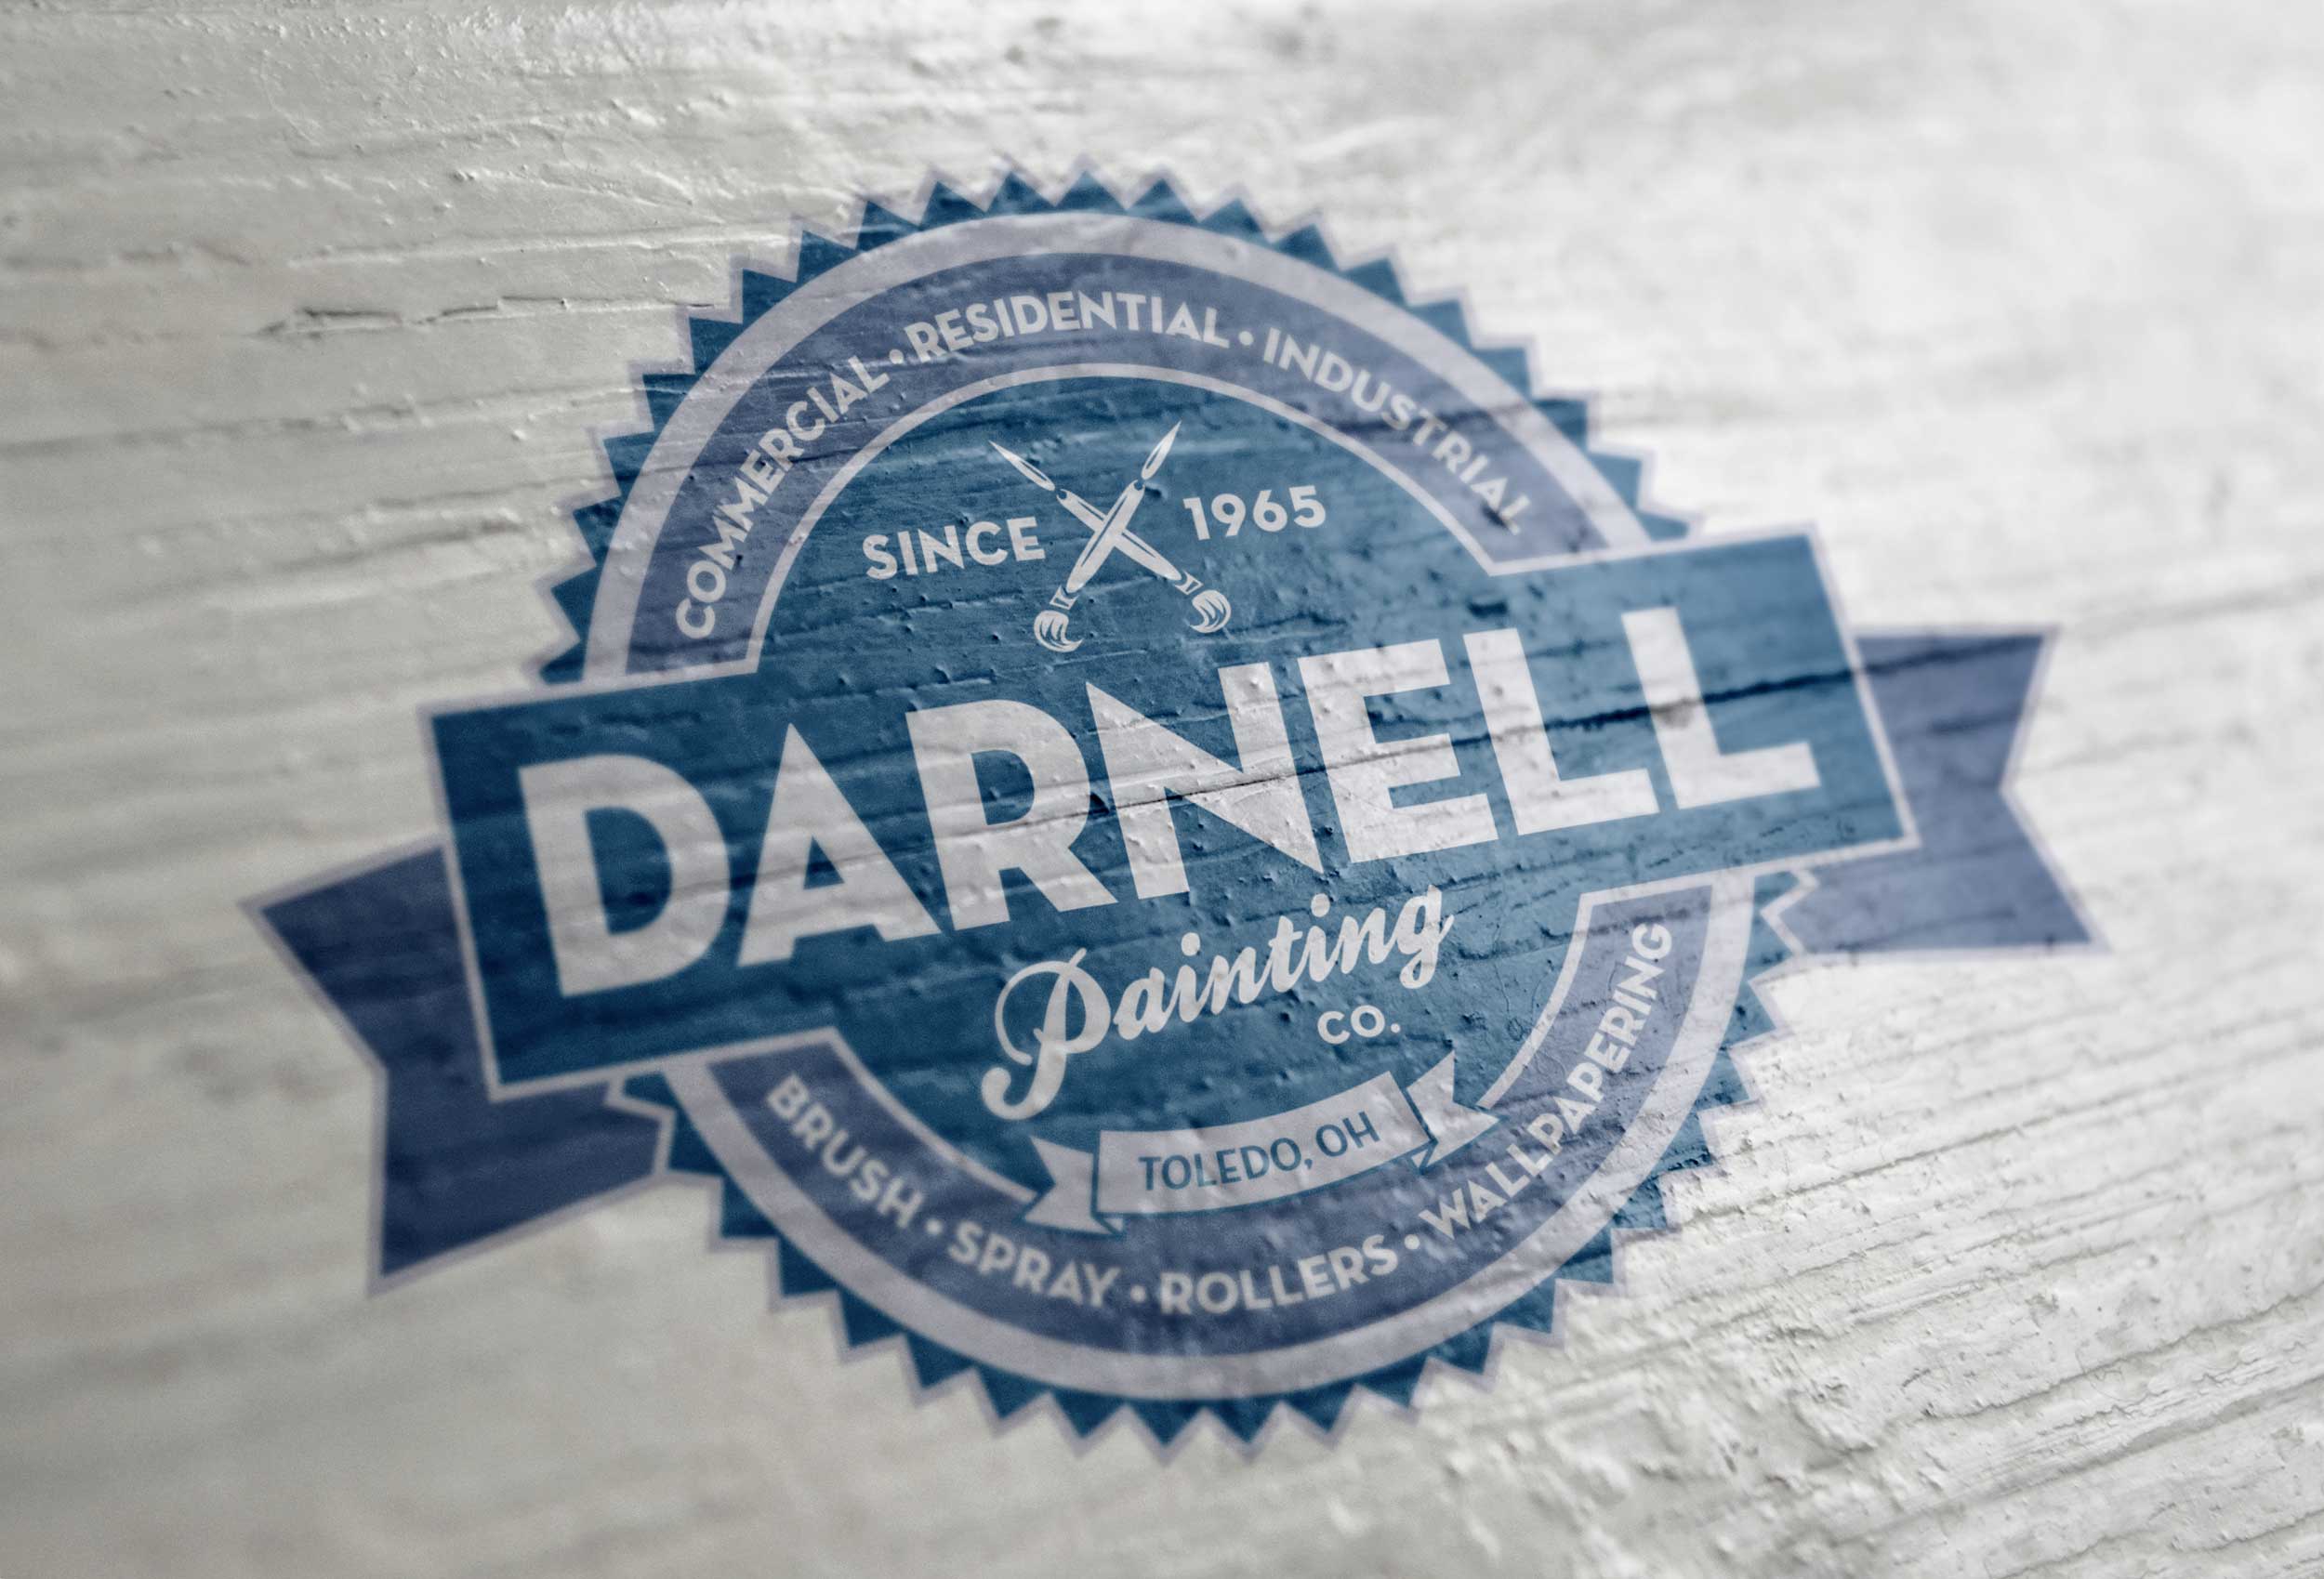 Darnell Painting Company